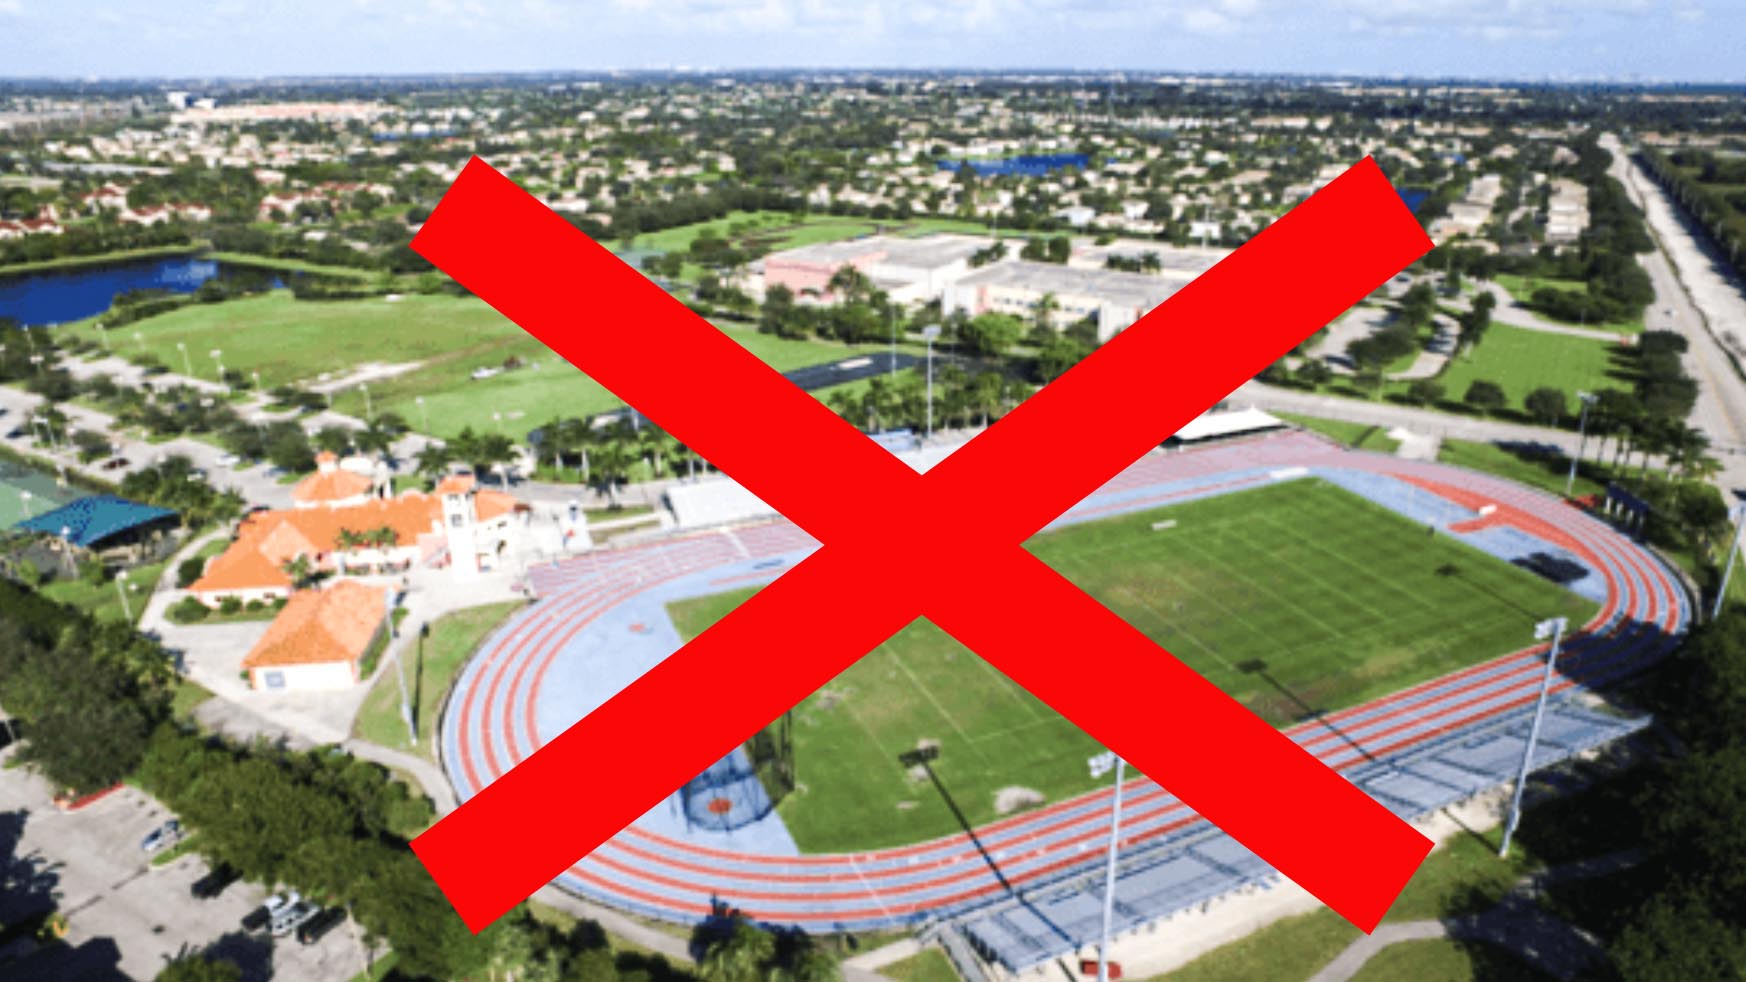 Commissioner’s Last-Ditch Effort to convince residents to support Track Fails